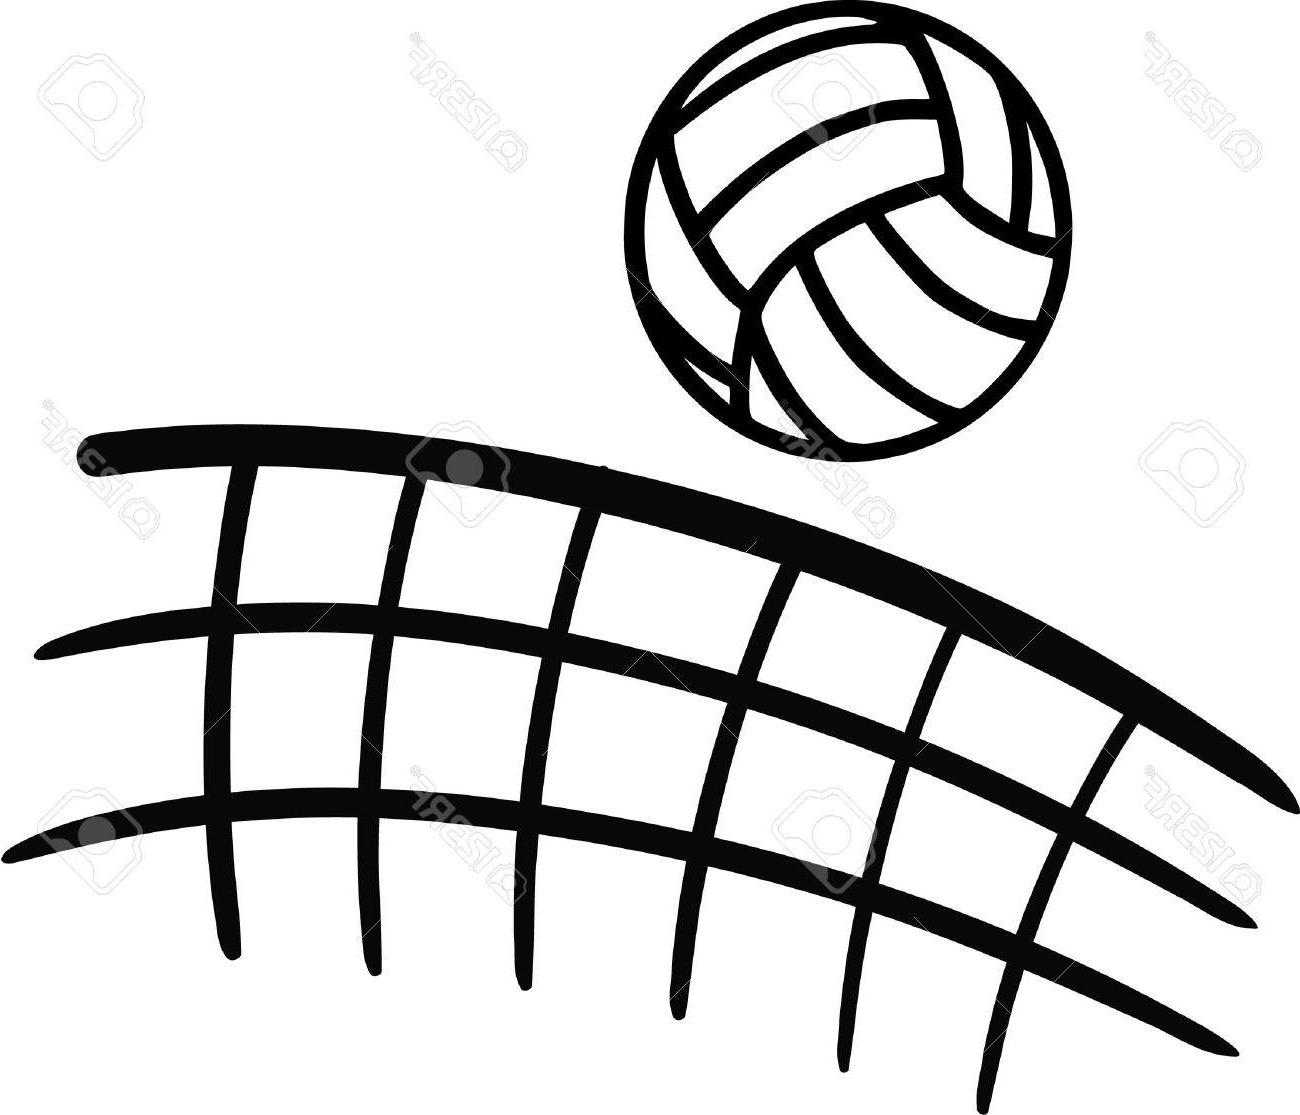 HD Volleyball Net Sketch Vector Pictures